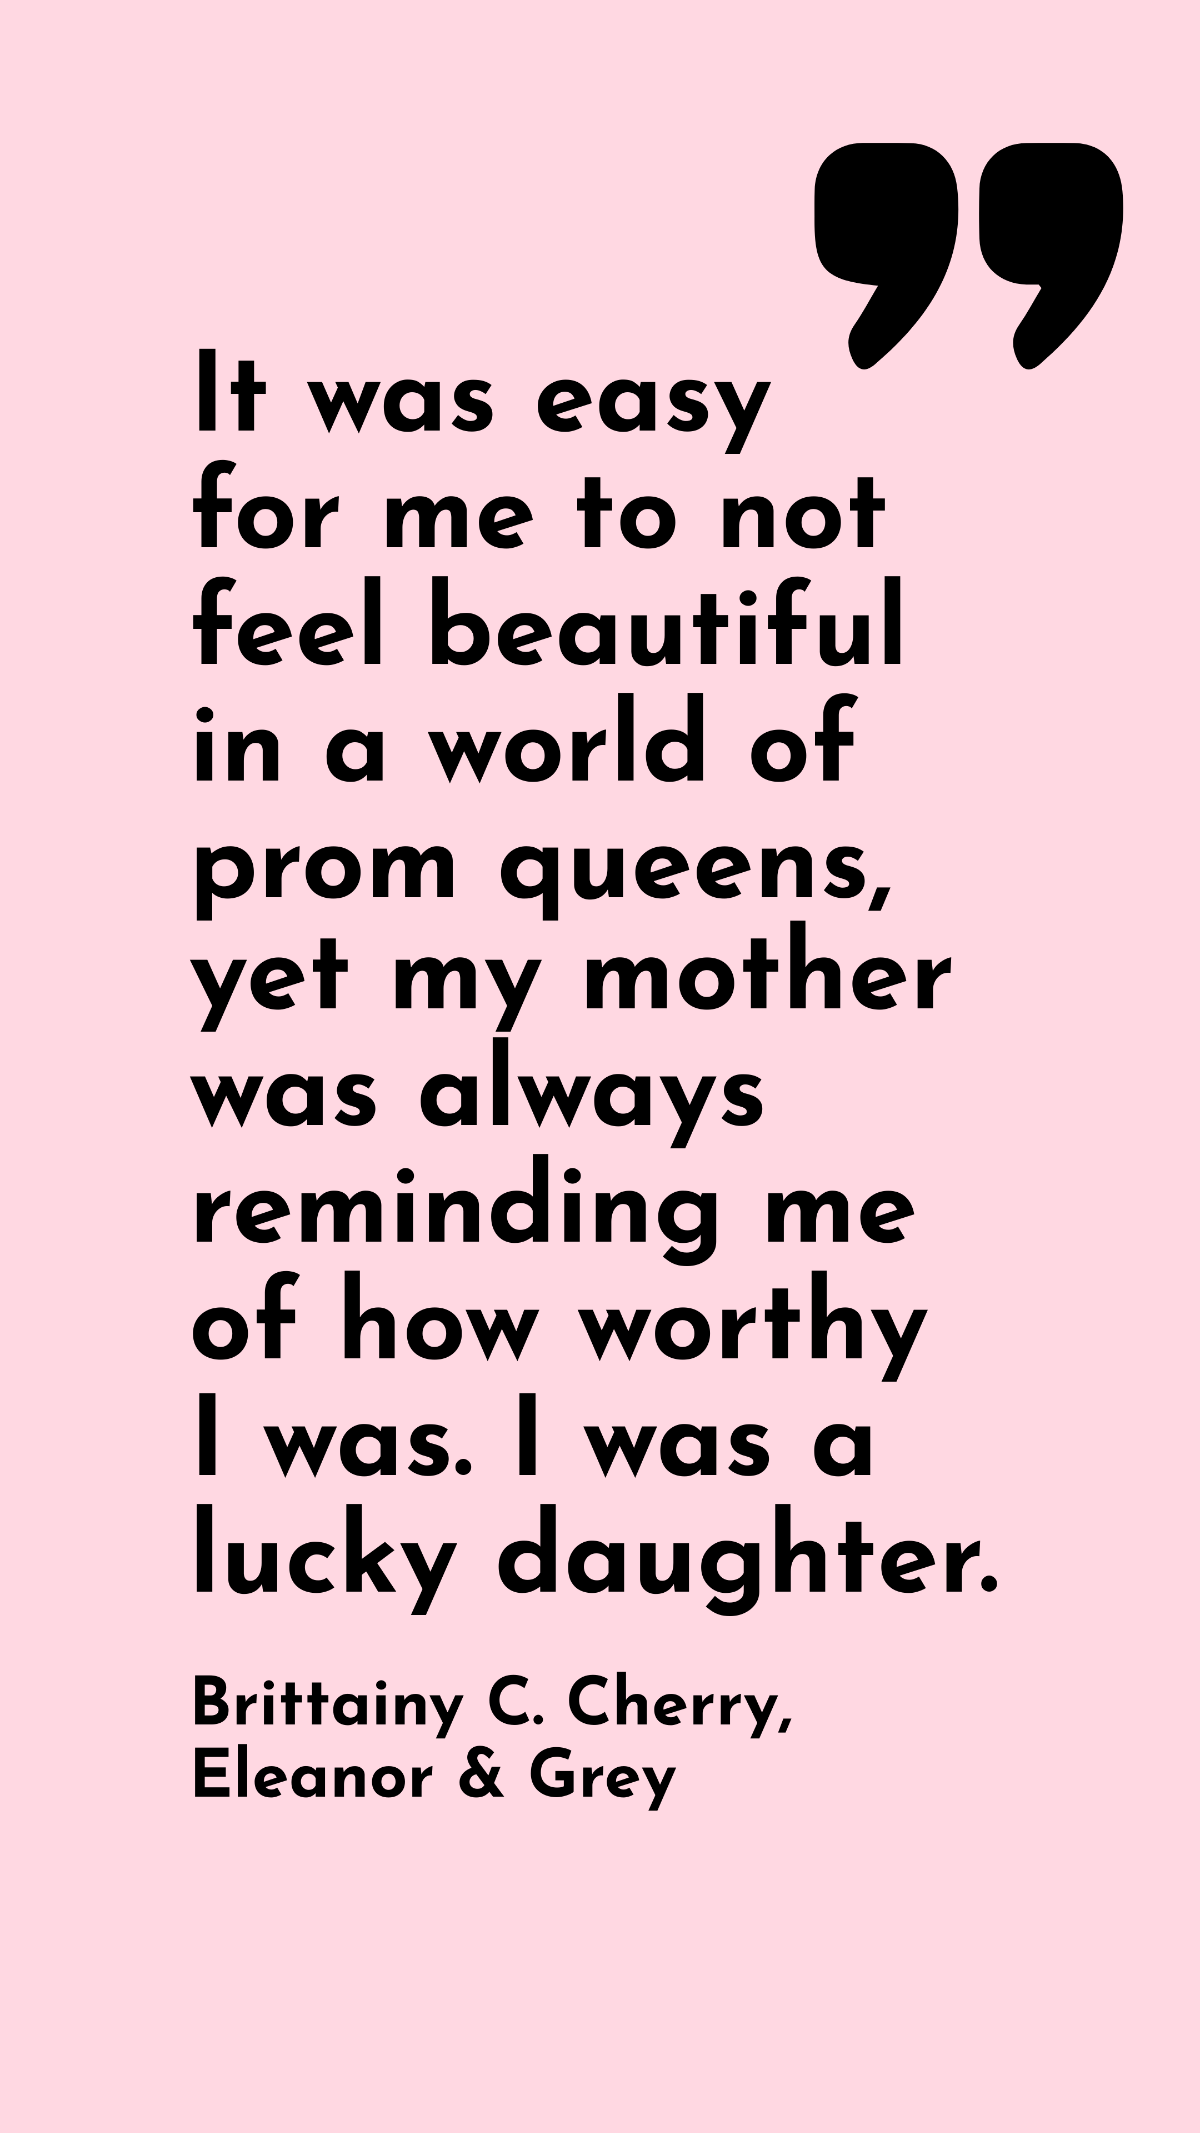 Free Brittainy C. Cherry, Eleanor & Grey - It was easy for me to not feel beautiful in a world of prom queens, yet my mother was always reminding me of how worthy I was. I was a lucky daughter. Template